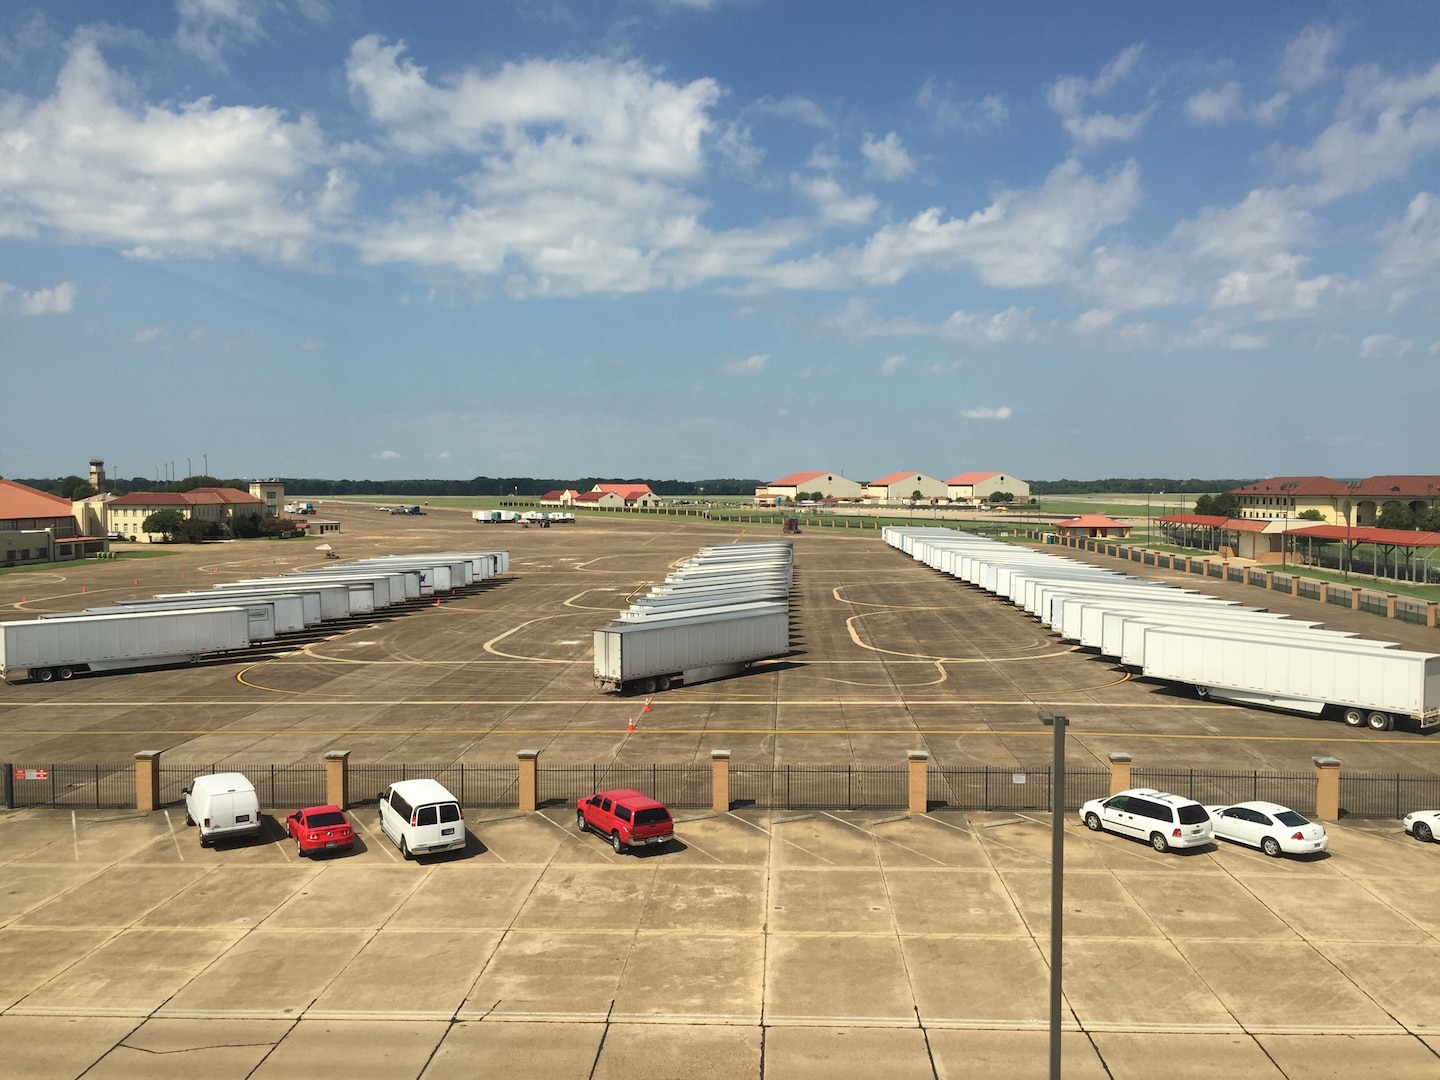 There are 110 trailers filled with food, water, generators, medical supplies, baby formula and toddler kits staged on the air field at Maxwell Air Force Base located in Montgomery, Ala.